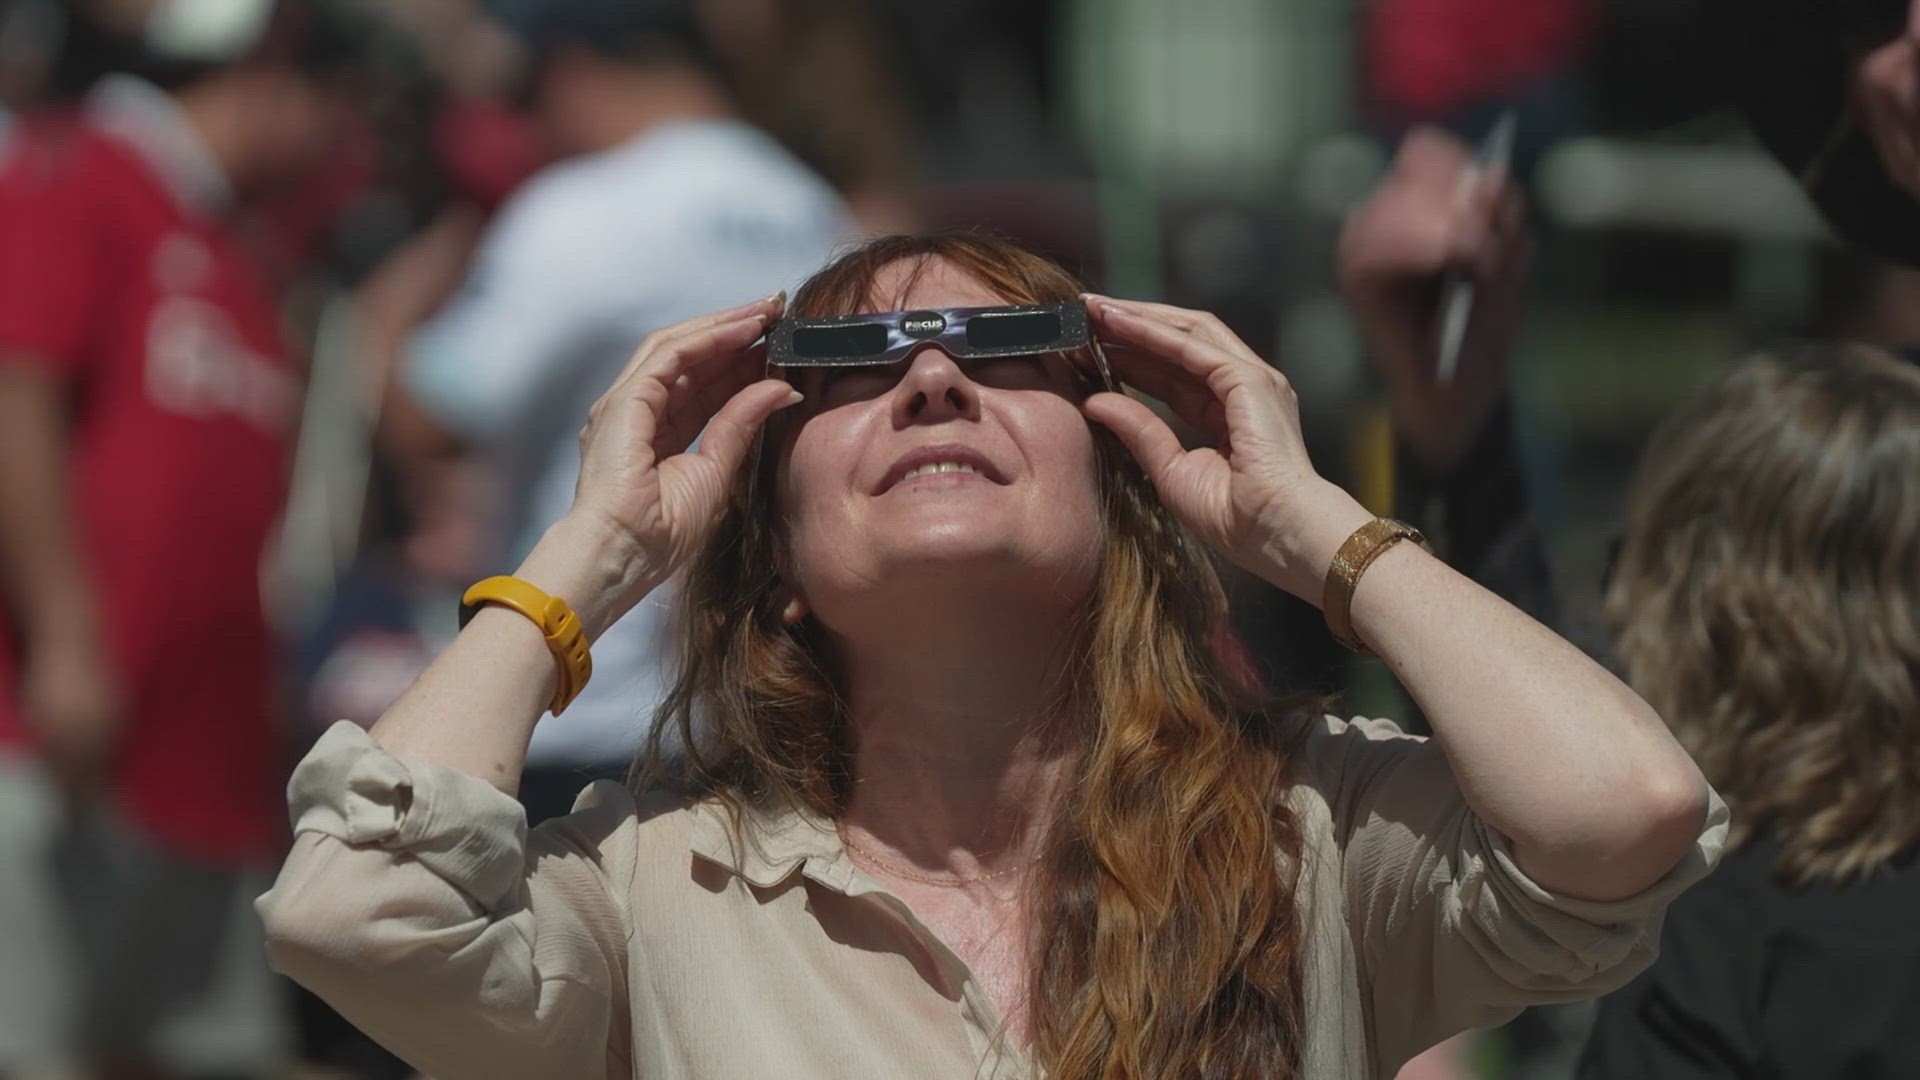 “Anyone,” Yngve Kristiansen said when asked if he'd recommend this eclipse journey. “Young or old, half-blind or eagle-eyed. It’s an experience.”